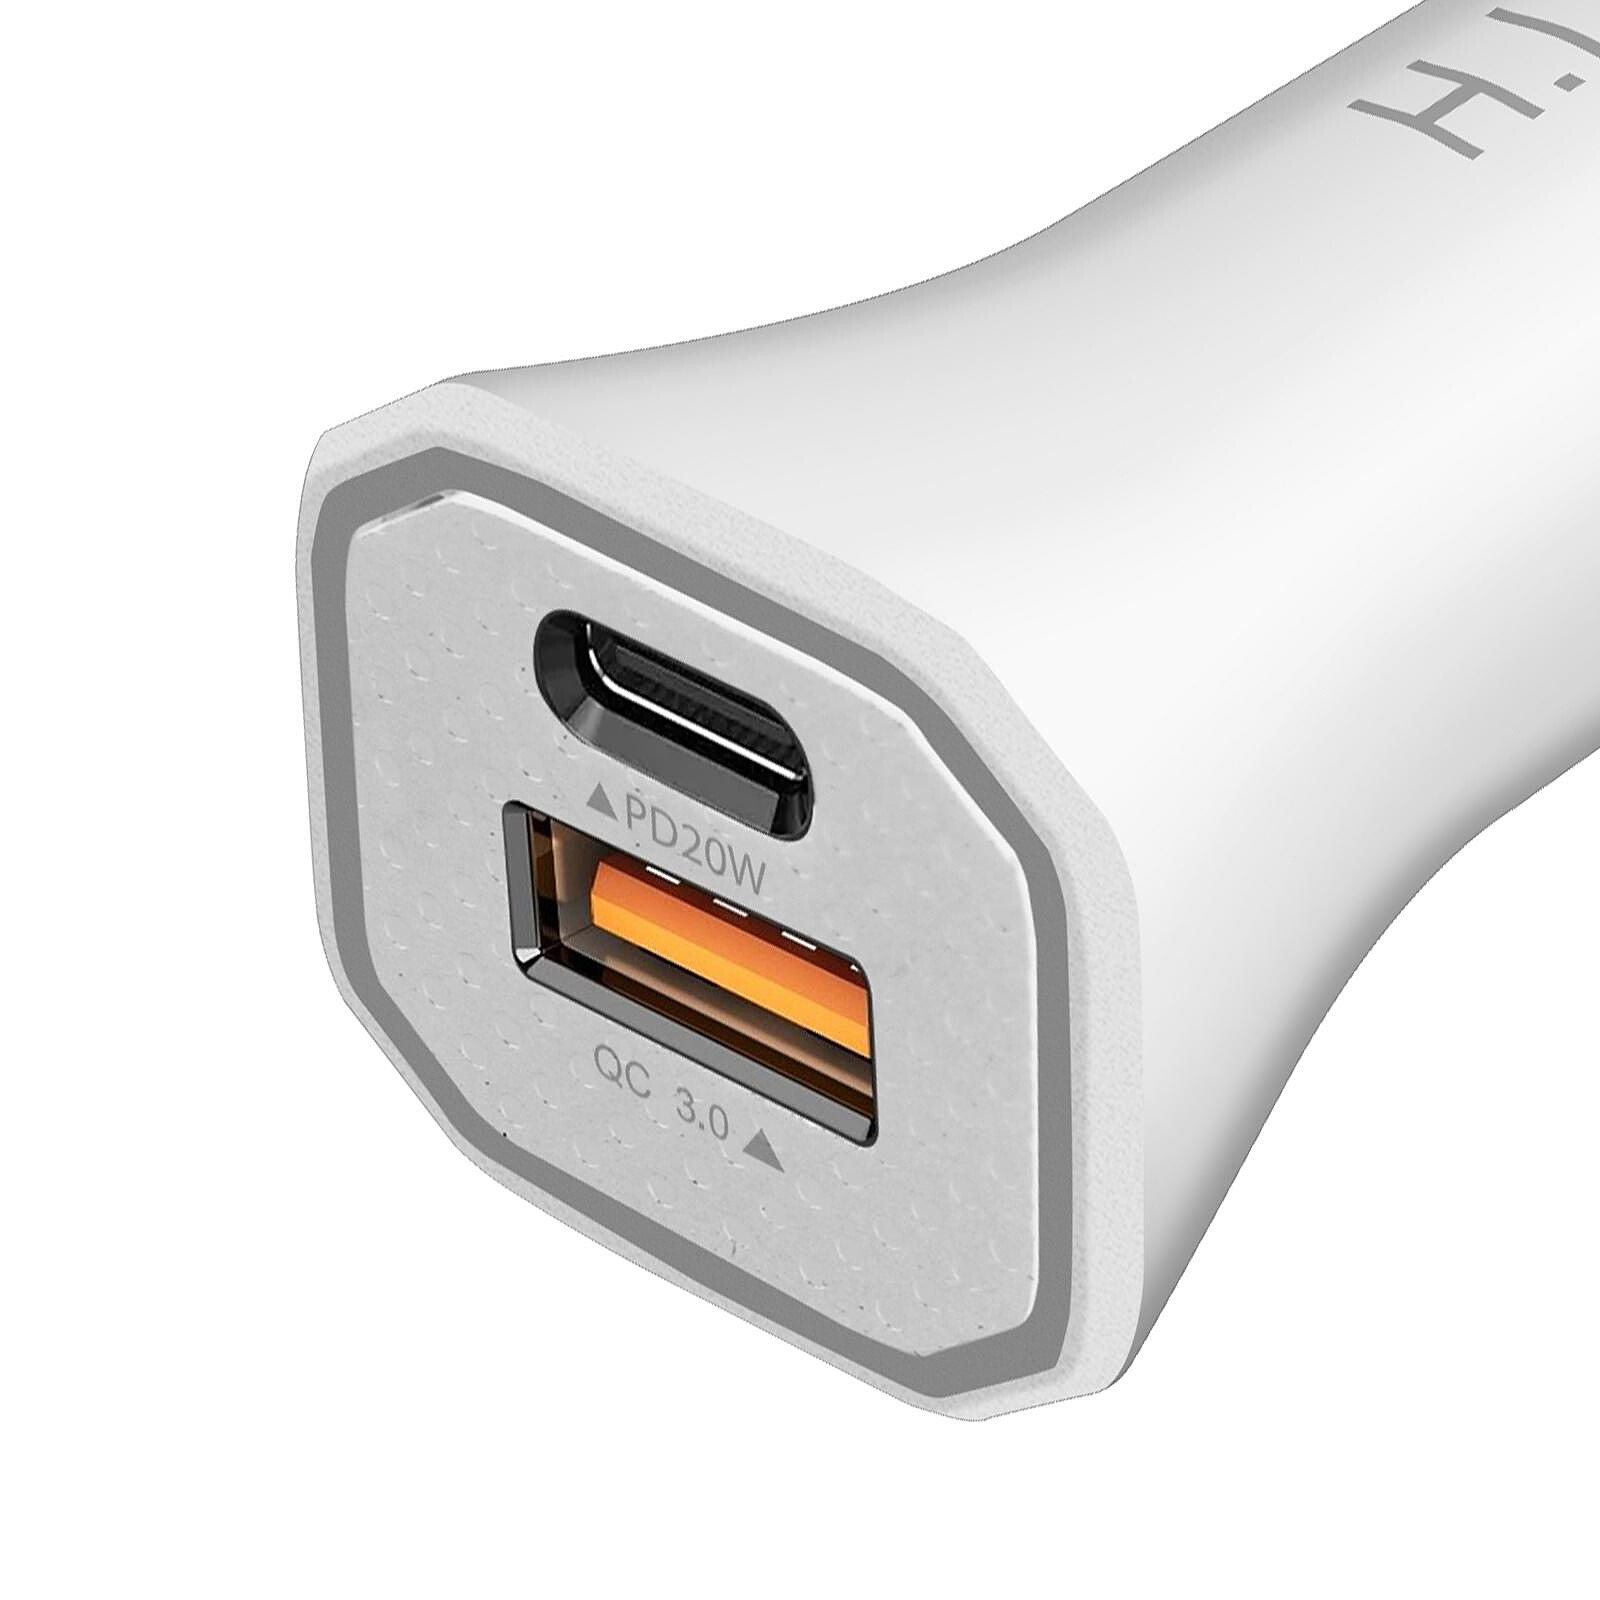 Chargeur allume-cigare 2 USB 2 ports USB 2.1A + 1A blanc